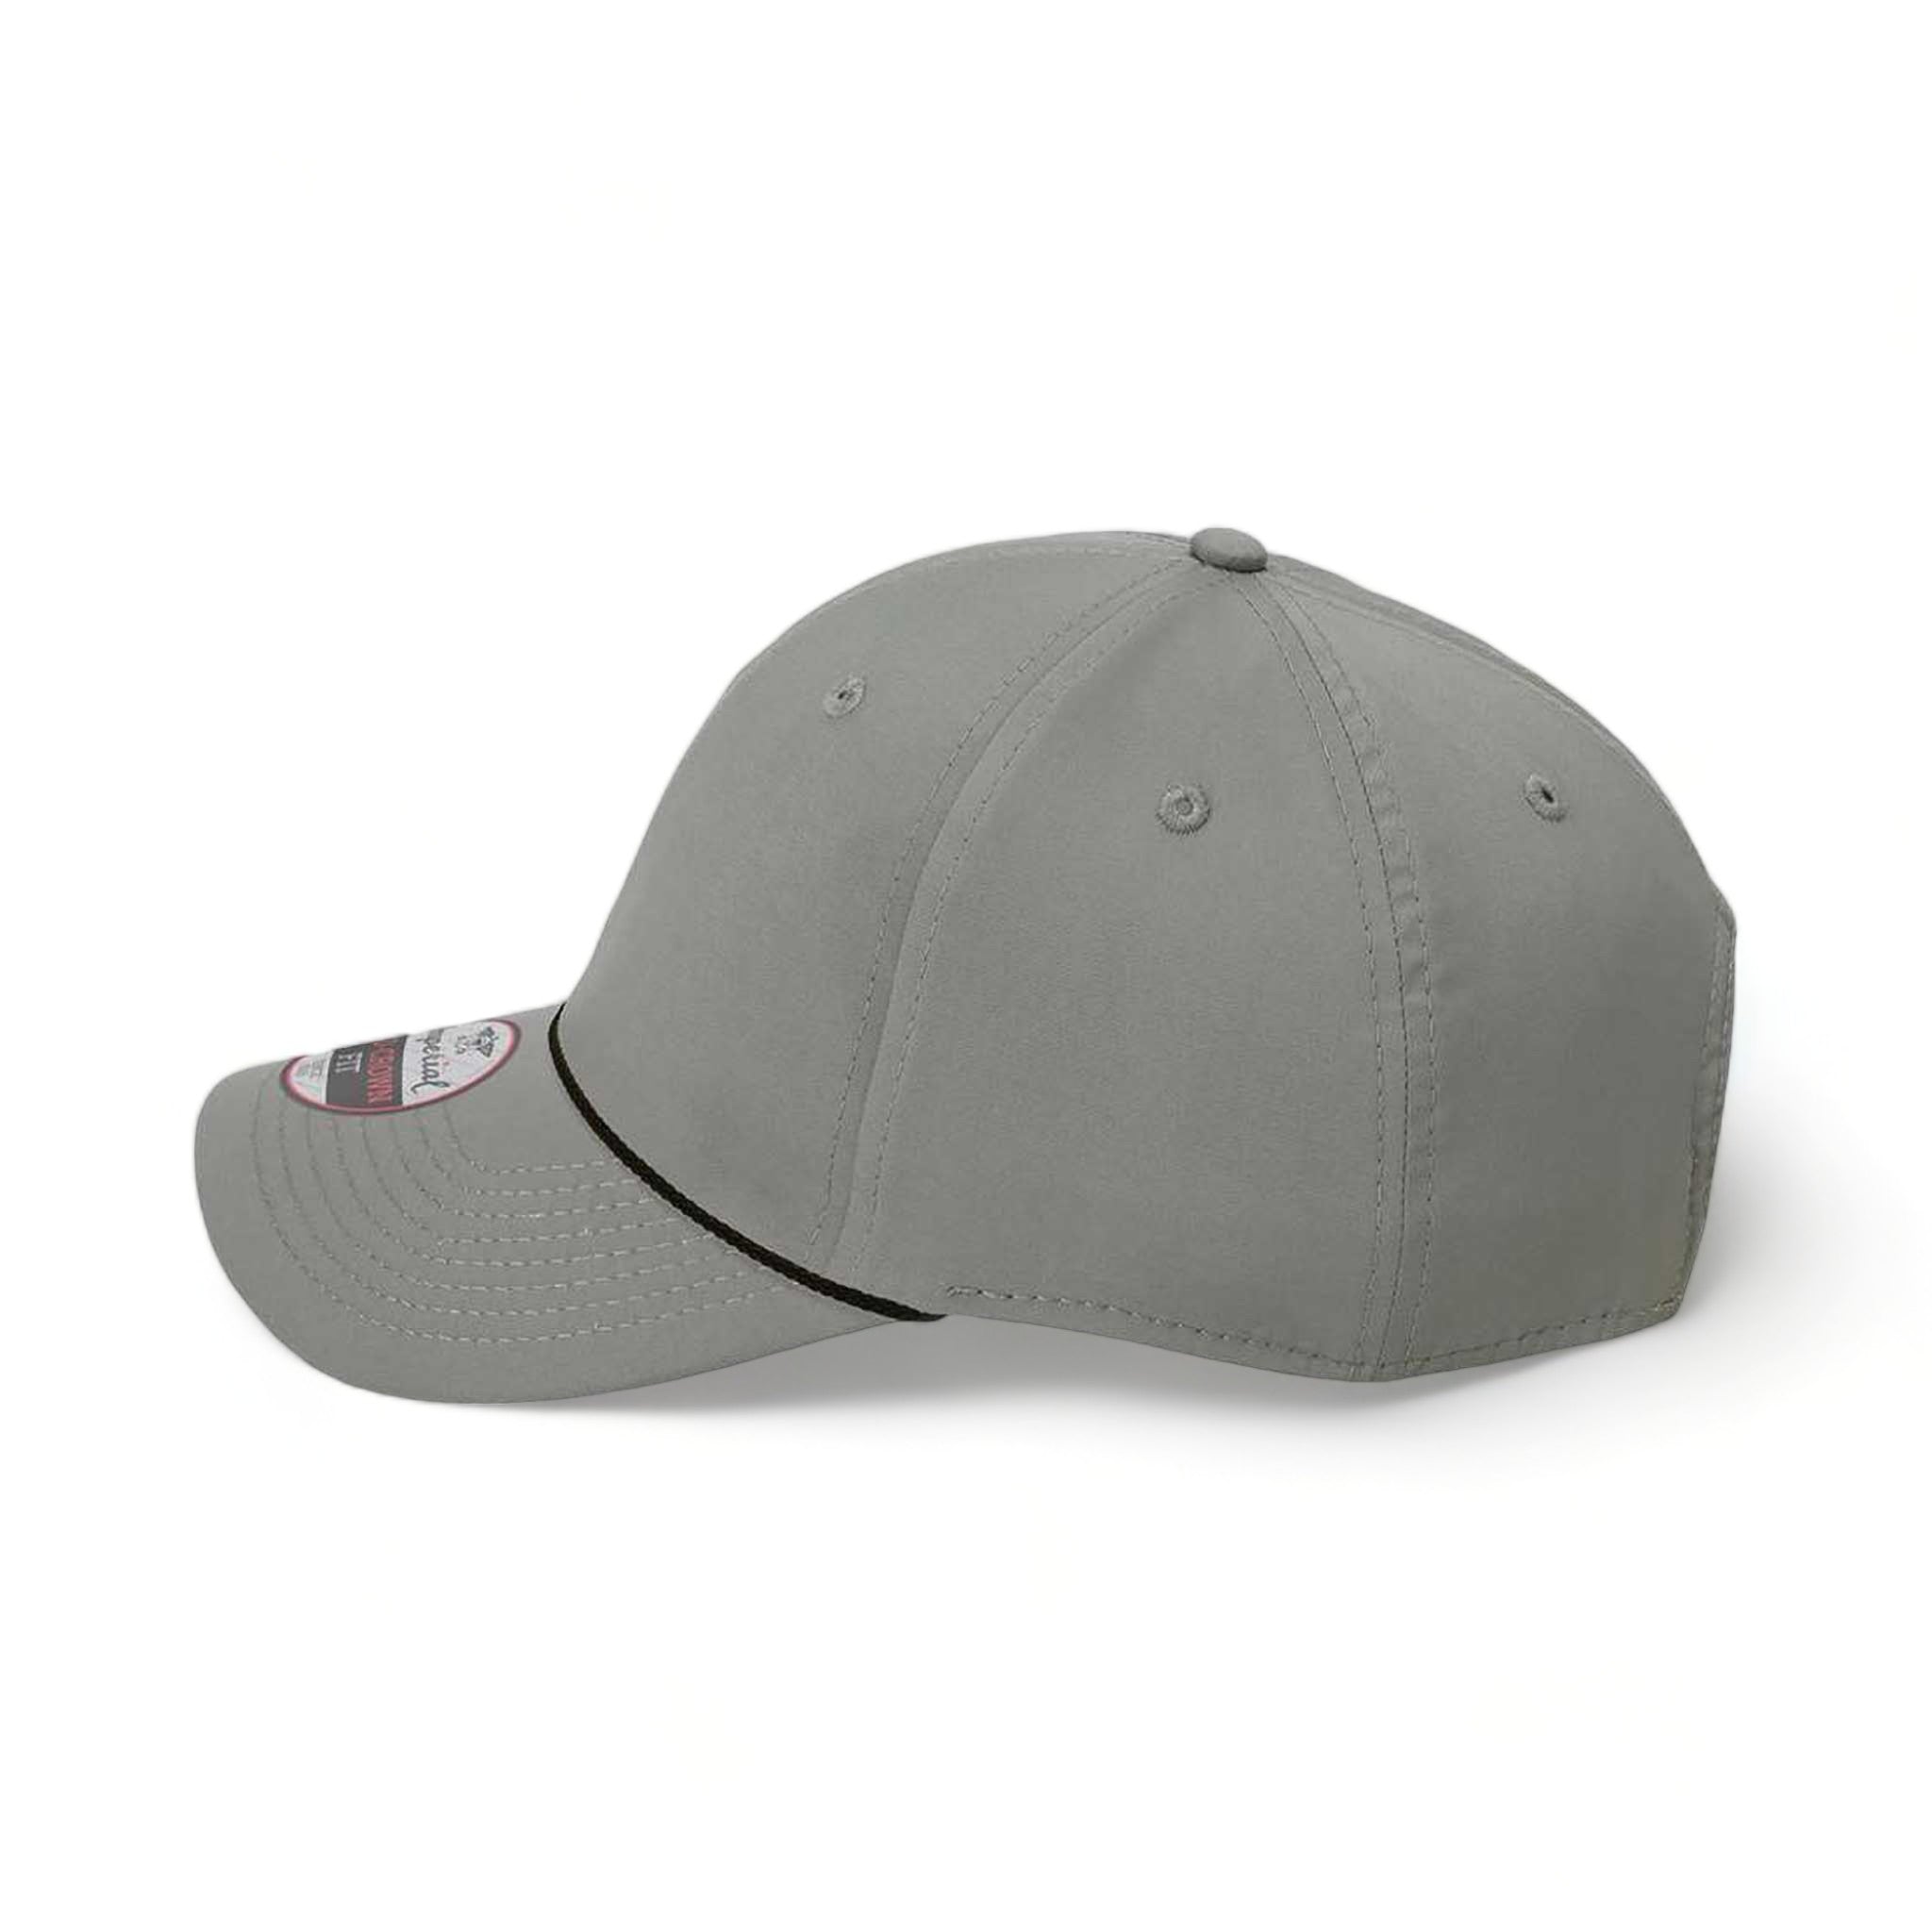 Side view of Imperial 7054 custom hat in grey and black